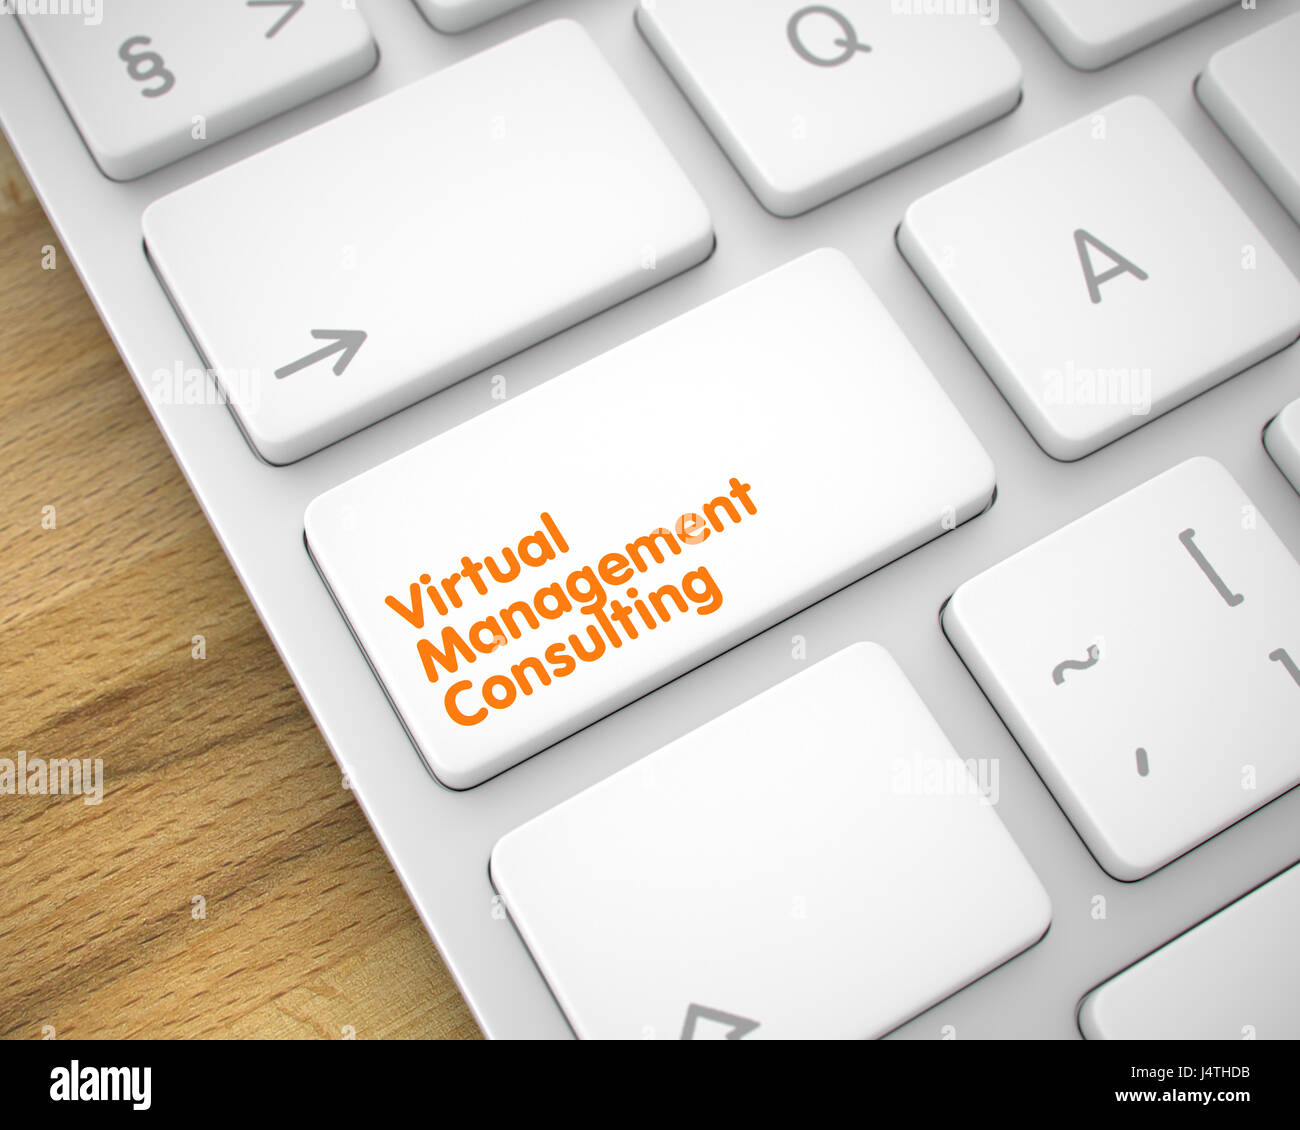 Virtual Management Consulting - Message on White Keyboard Button Stock Photo